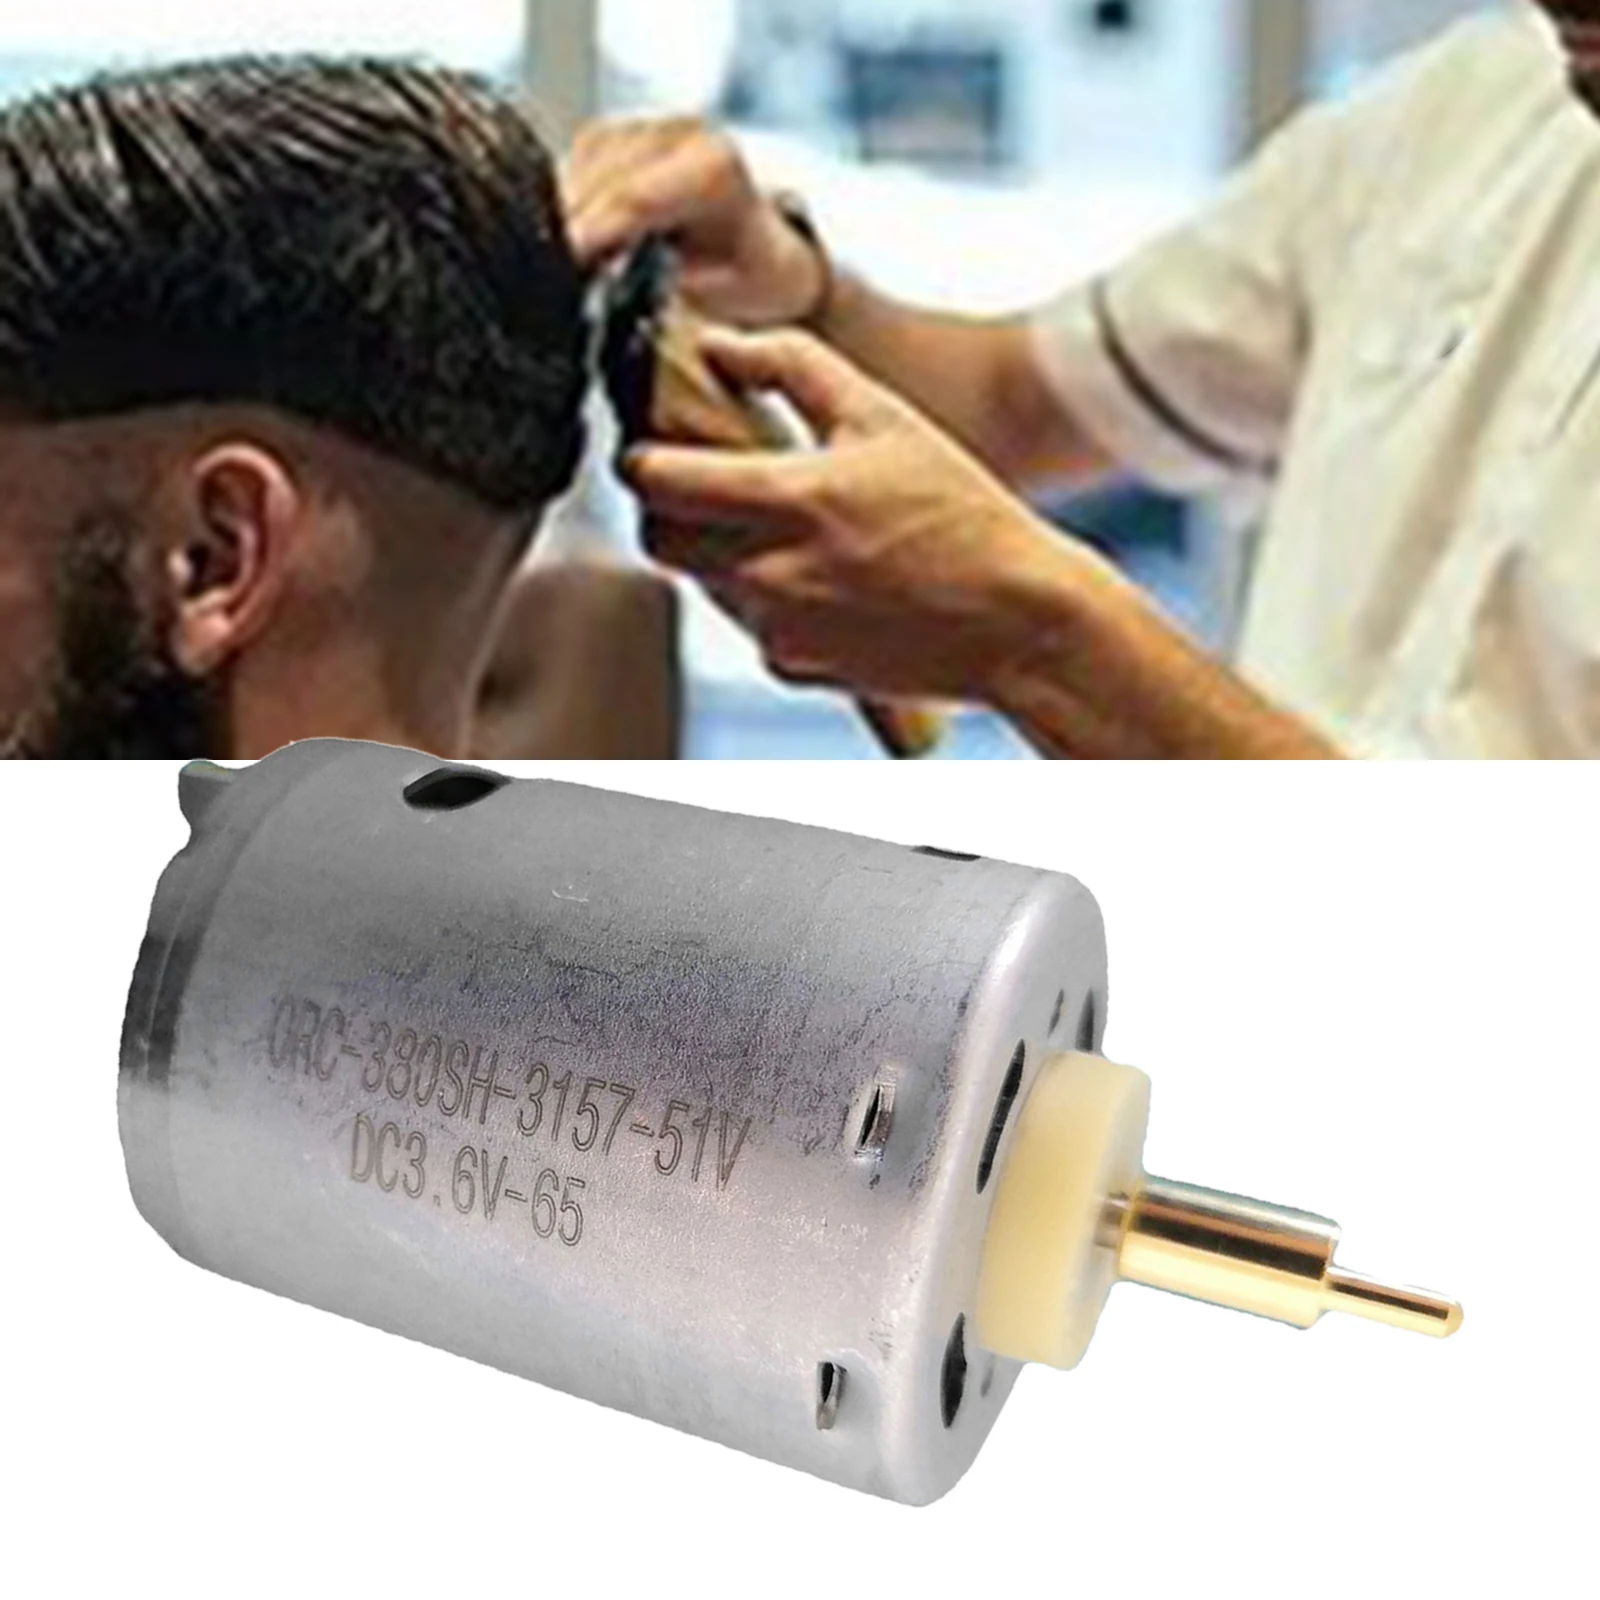 Hair Clipper Motor Replacement 6500 RPM Fit for Wahl 8148 8591 Accessories Replacement Motor Hair Clipper Repair Parts